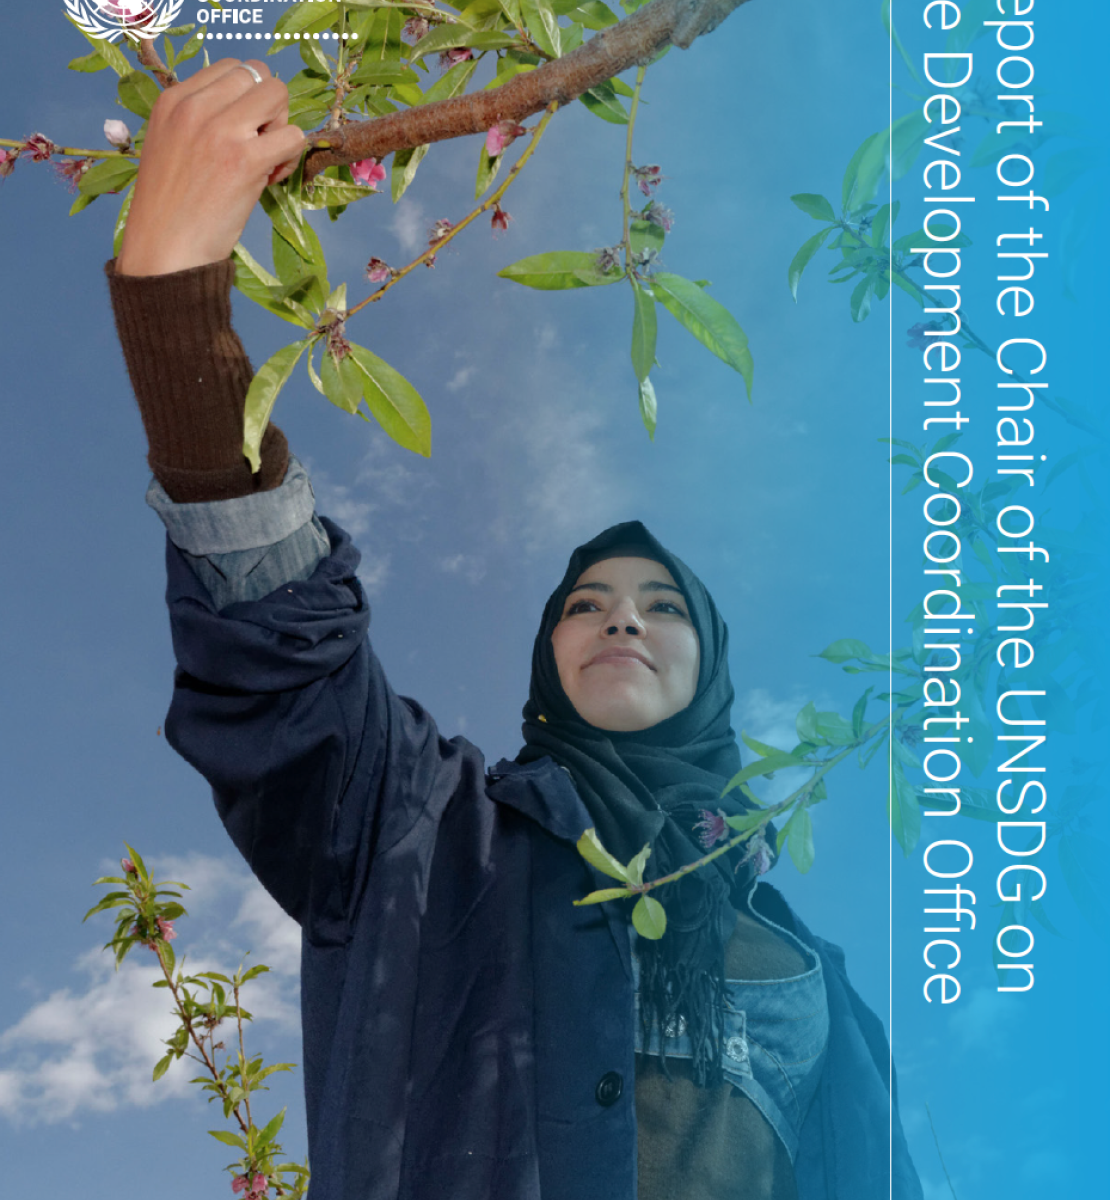 The cover shows an image of a young woman reaching for a tree branch with the UN emblem to the top left of the cover and title displayed vertically across the right edge of the cover.